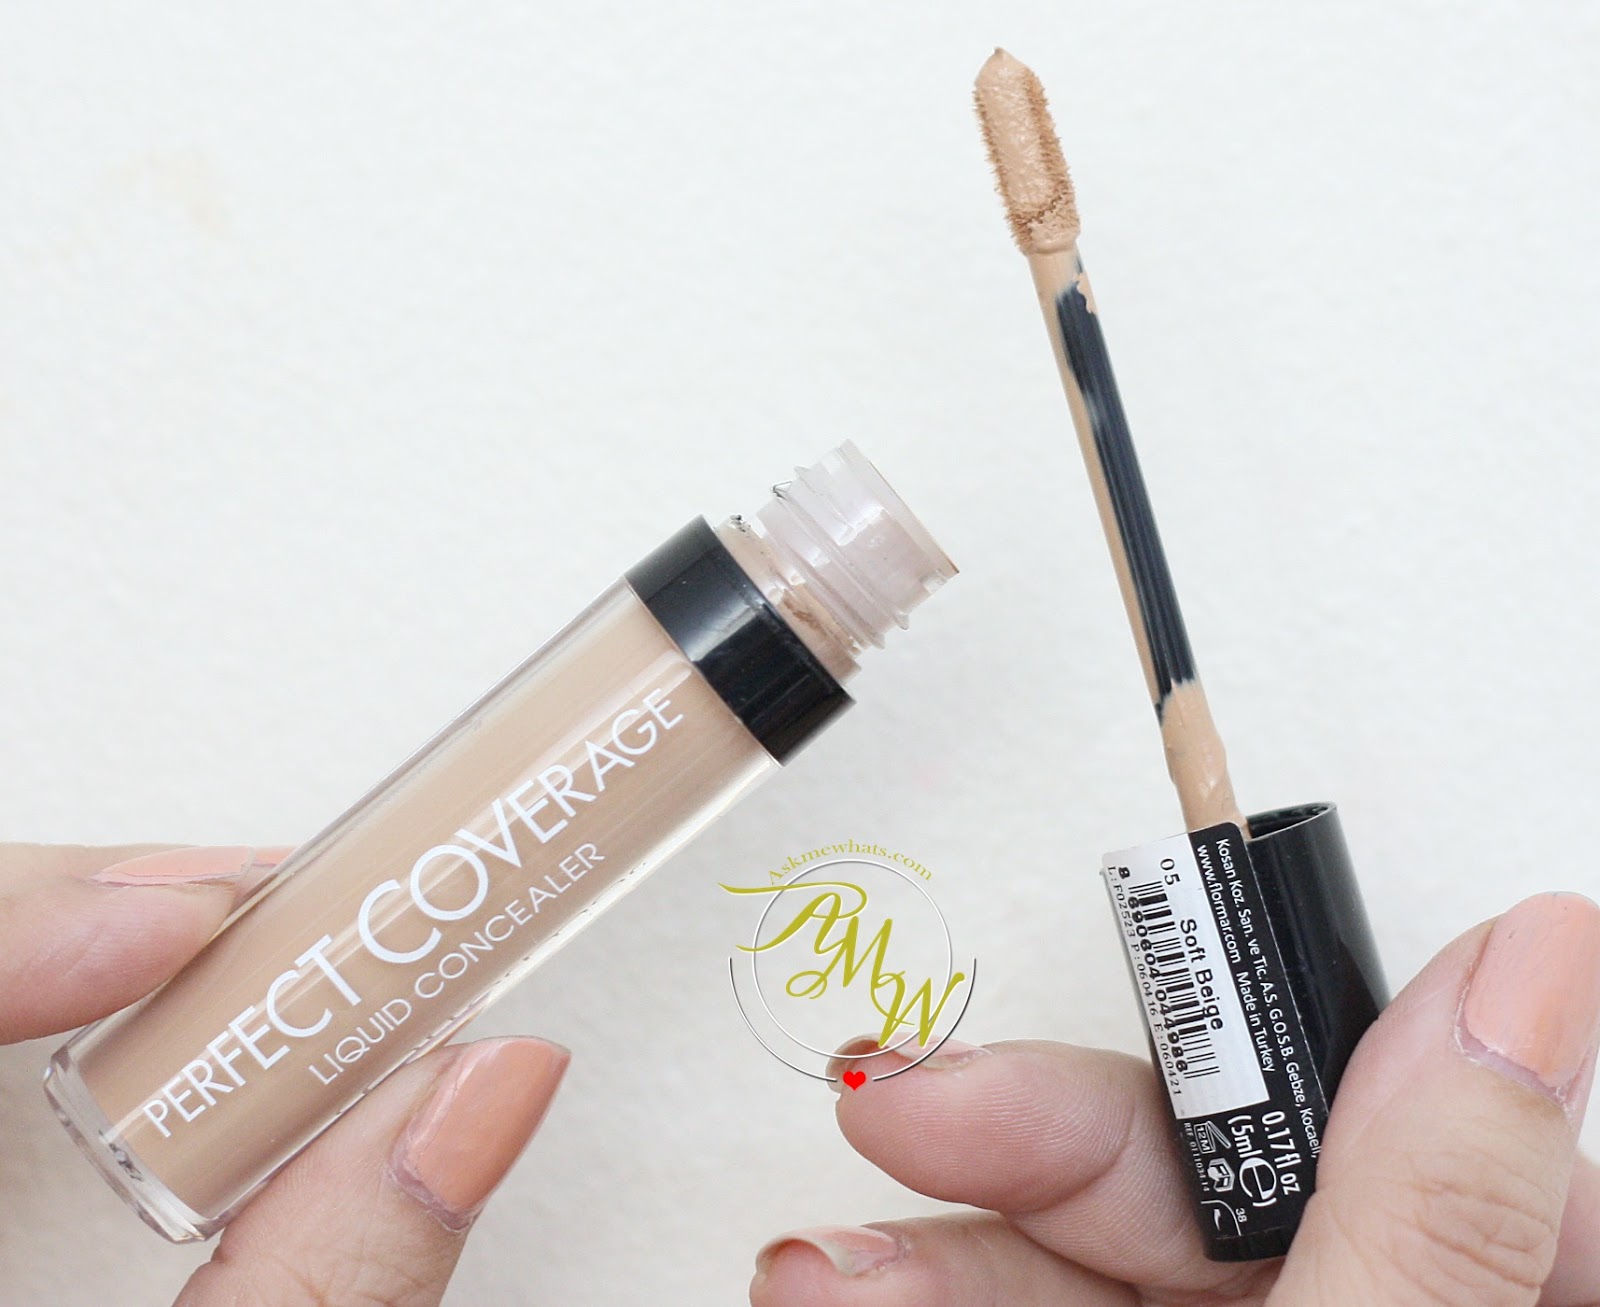 Askmewhats: Flormar Perfect Coverage Liquid Concealer Review